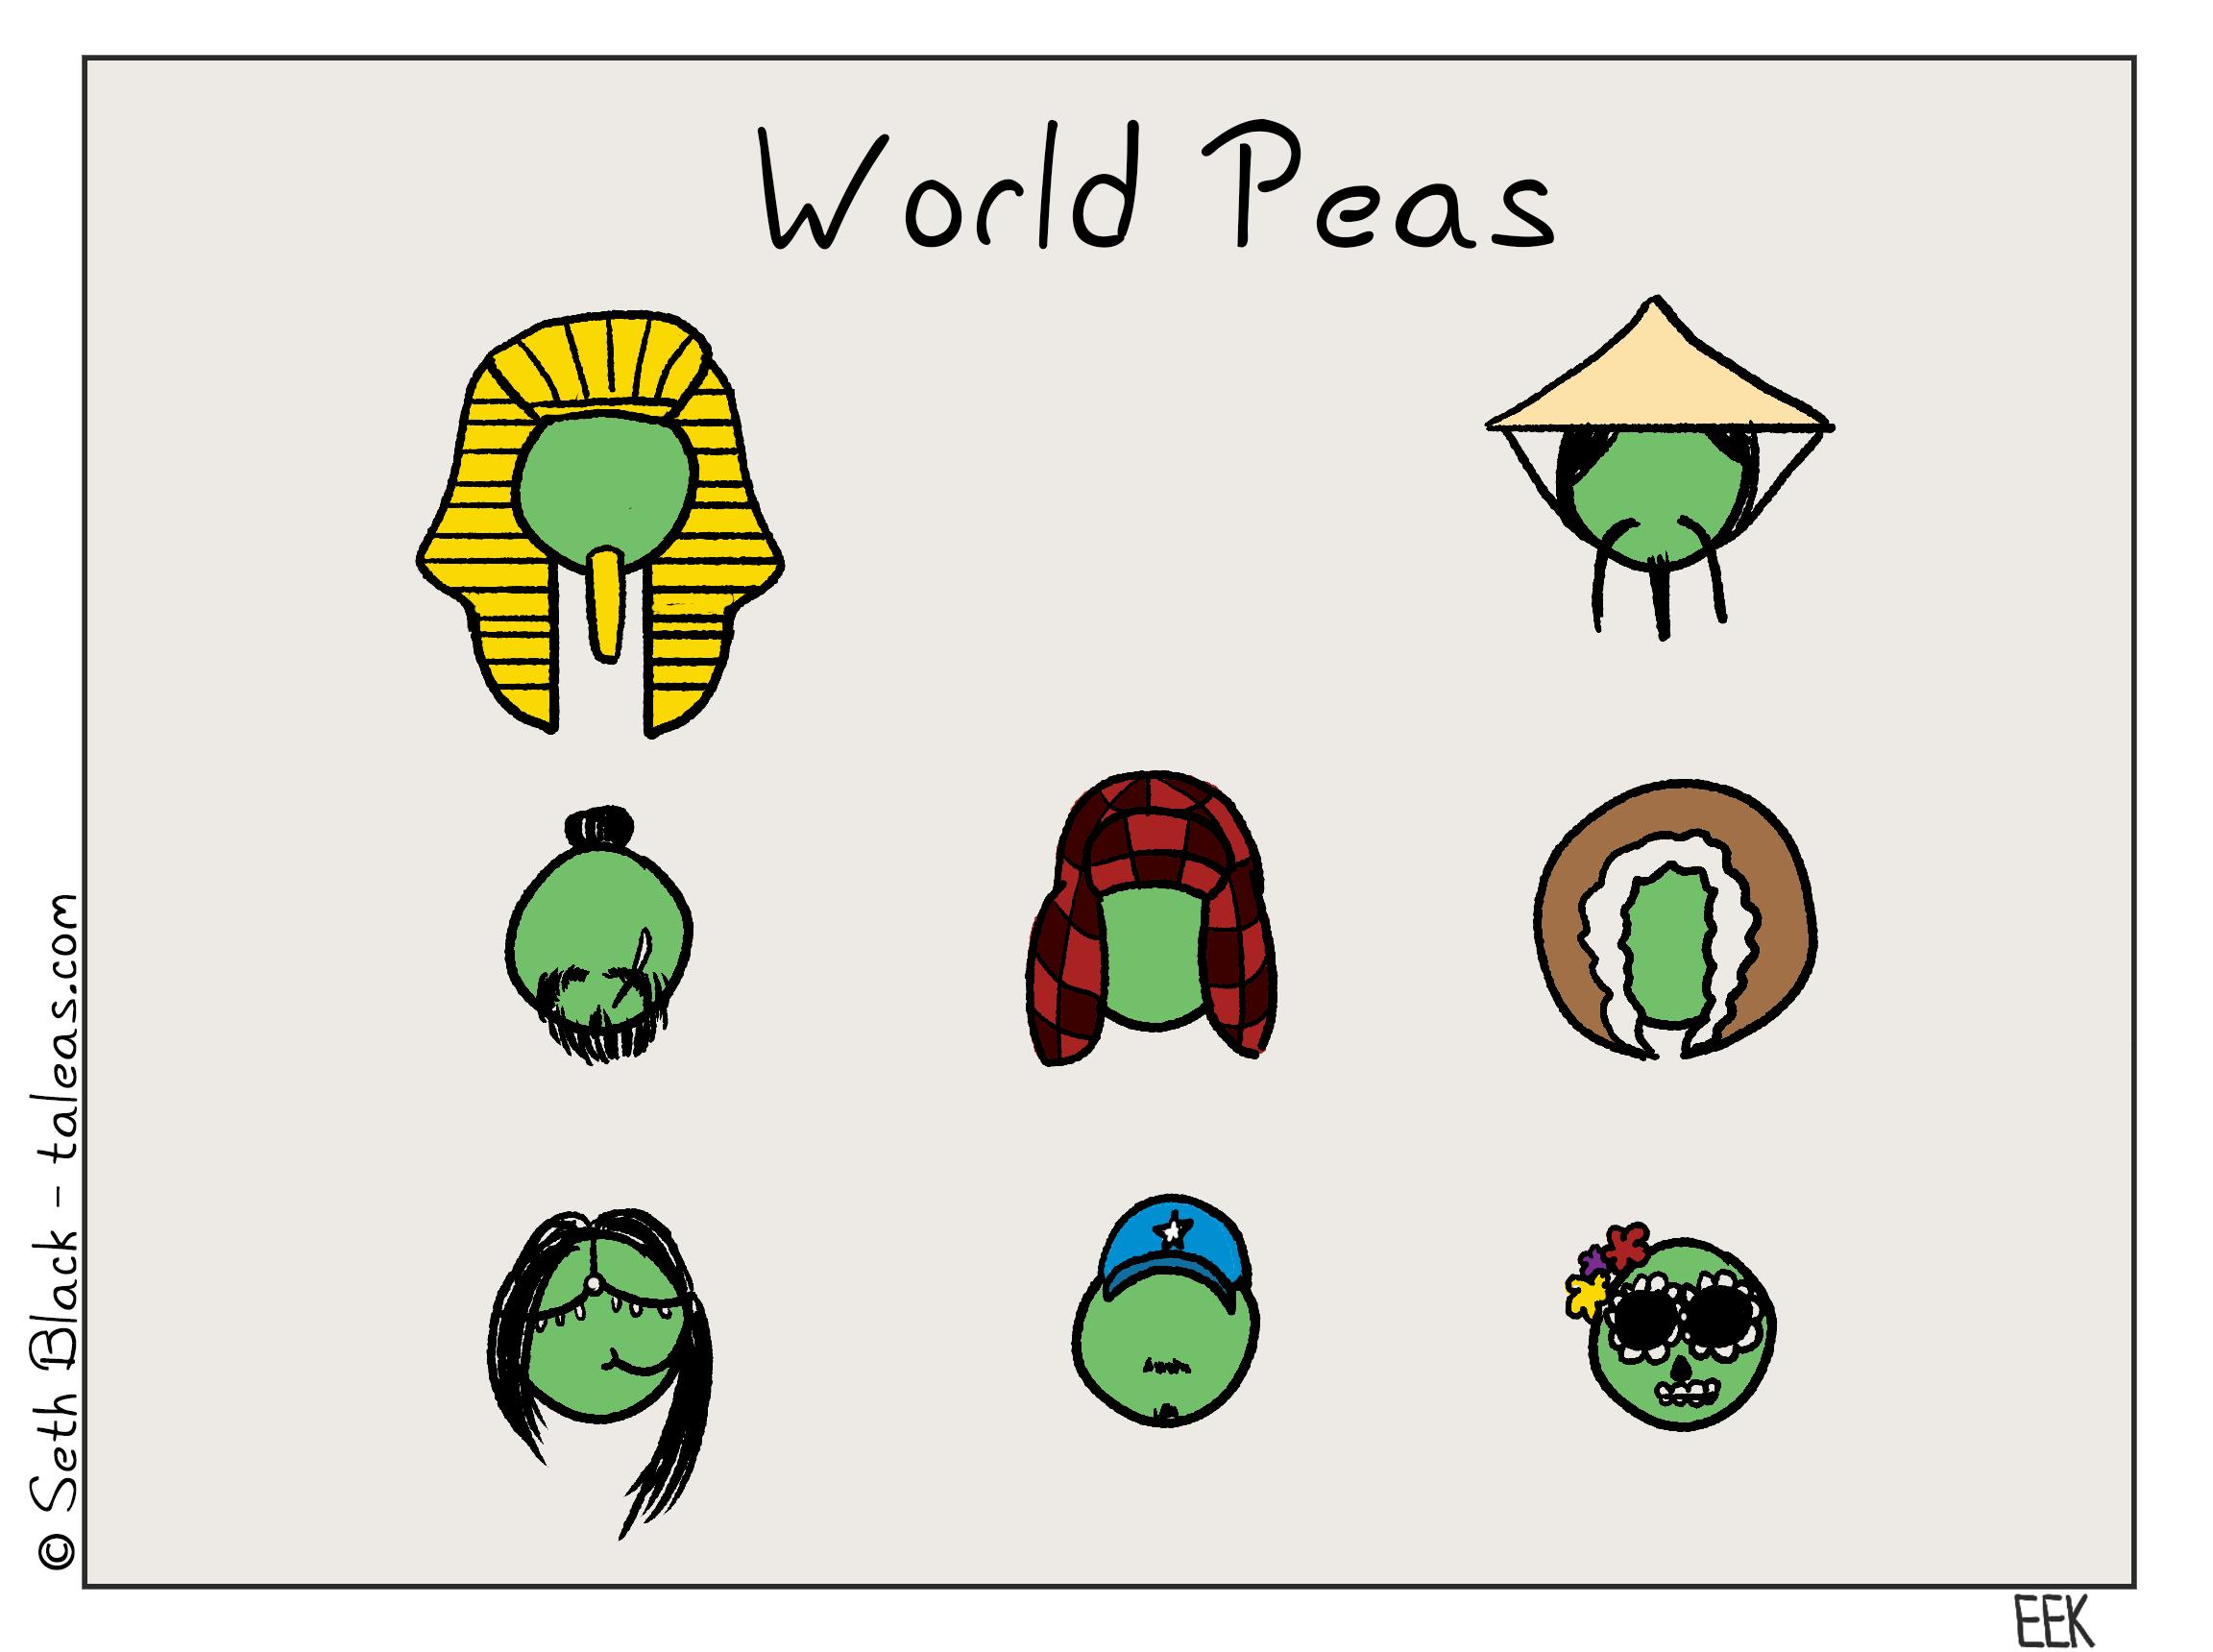 Eight peas are depicted with different cultural headwear: Pharaoh, Asian conical hat, chonmage, plad trapper hat, fur hood, baseball cap, indian woman, and woman with sugar skull makeup.